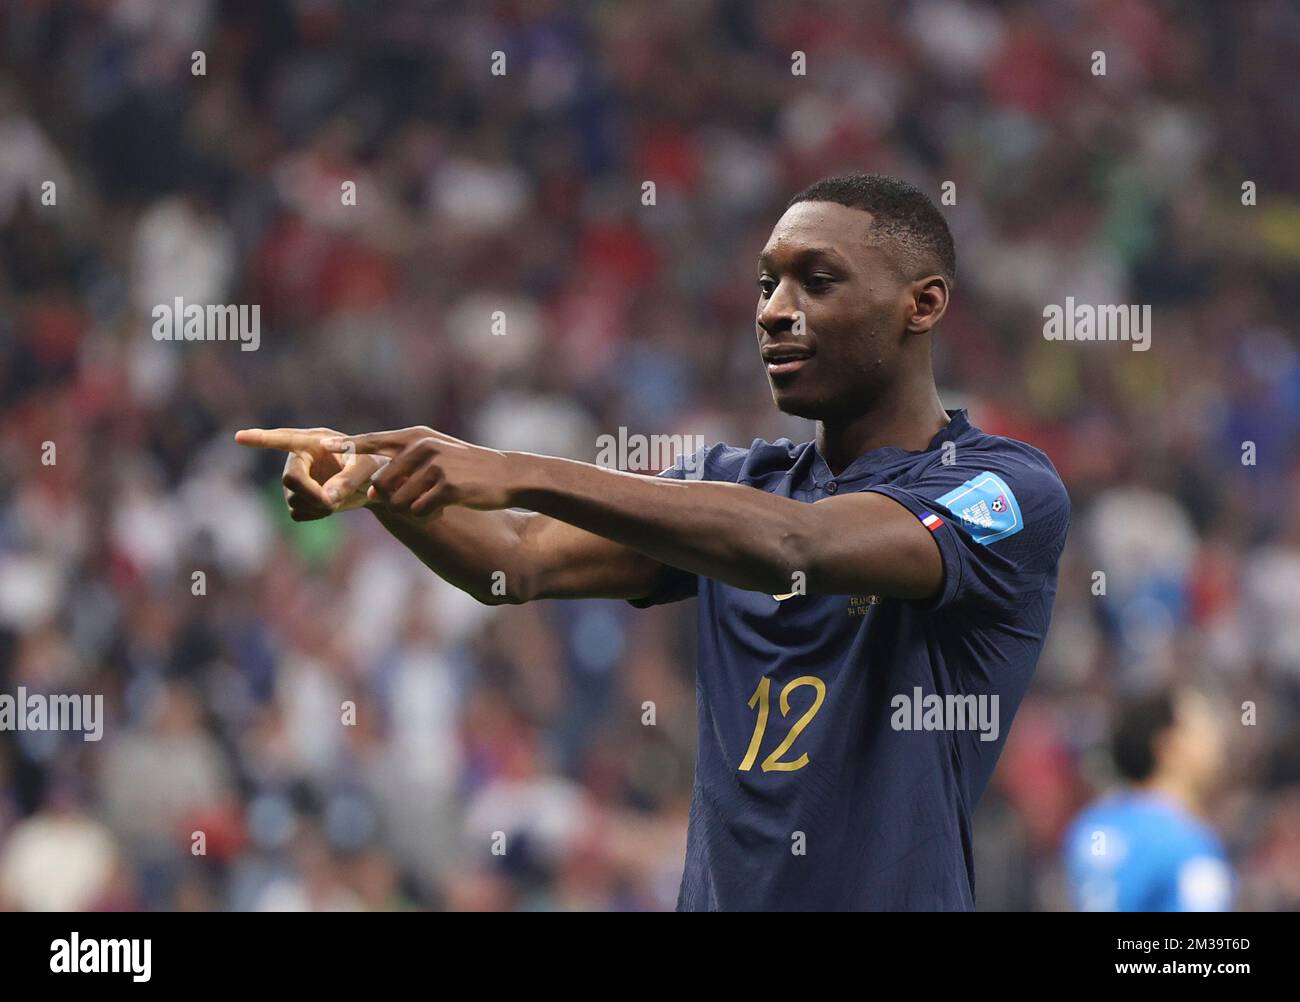 Al Khor, Qatar. 14th Dec, 2022. Randal Kolo Muani of France celebrates his goal during during the Semifinal match between France and Morocco of the 2022 FIFA World Cup at Al Bayt Stadium in Al Khor, Qatar, Dec. 14, 2022. Credit: Cao Can/Xinhua/Alamy Live News Stock Photo